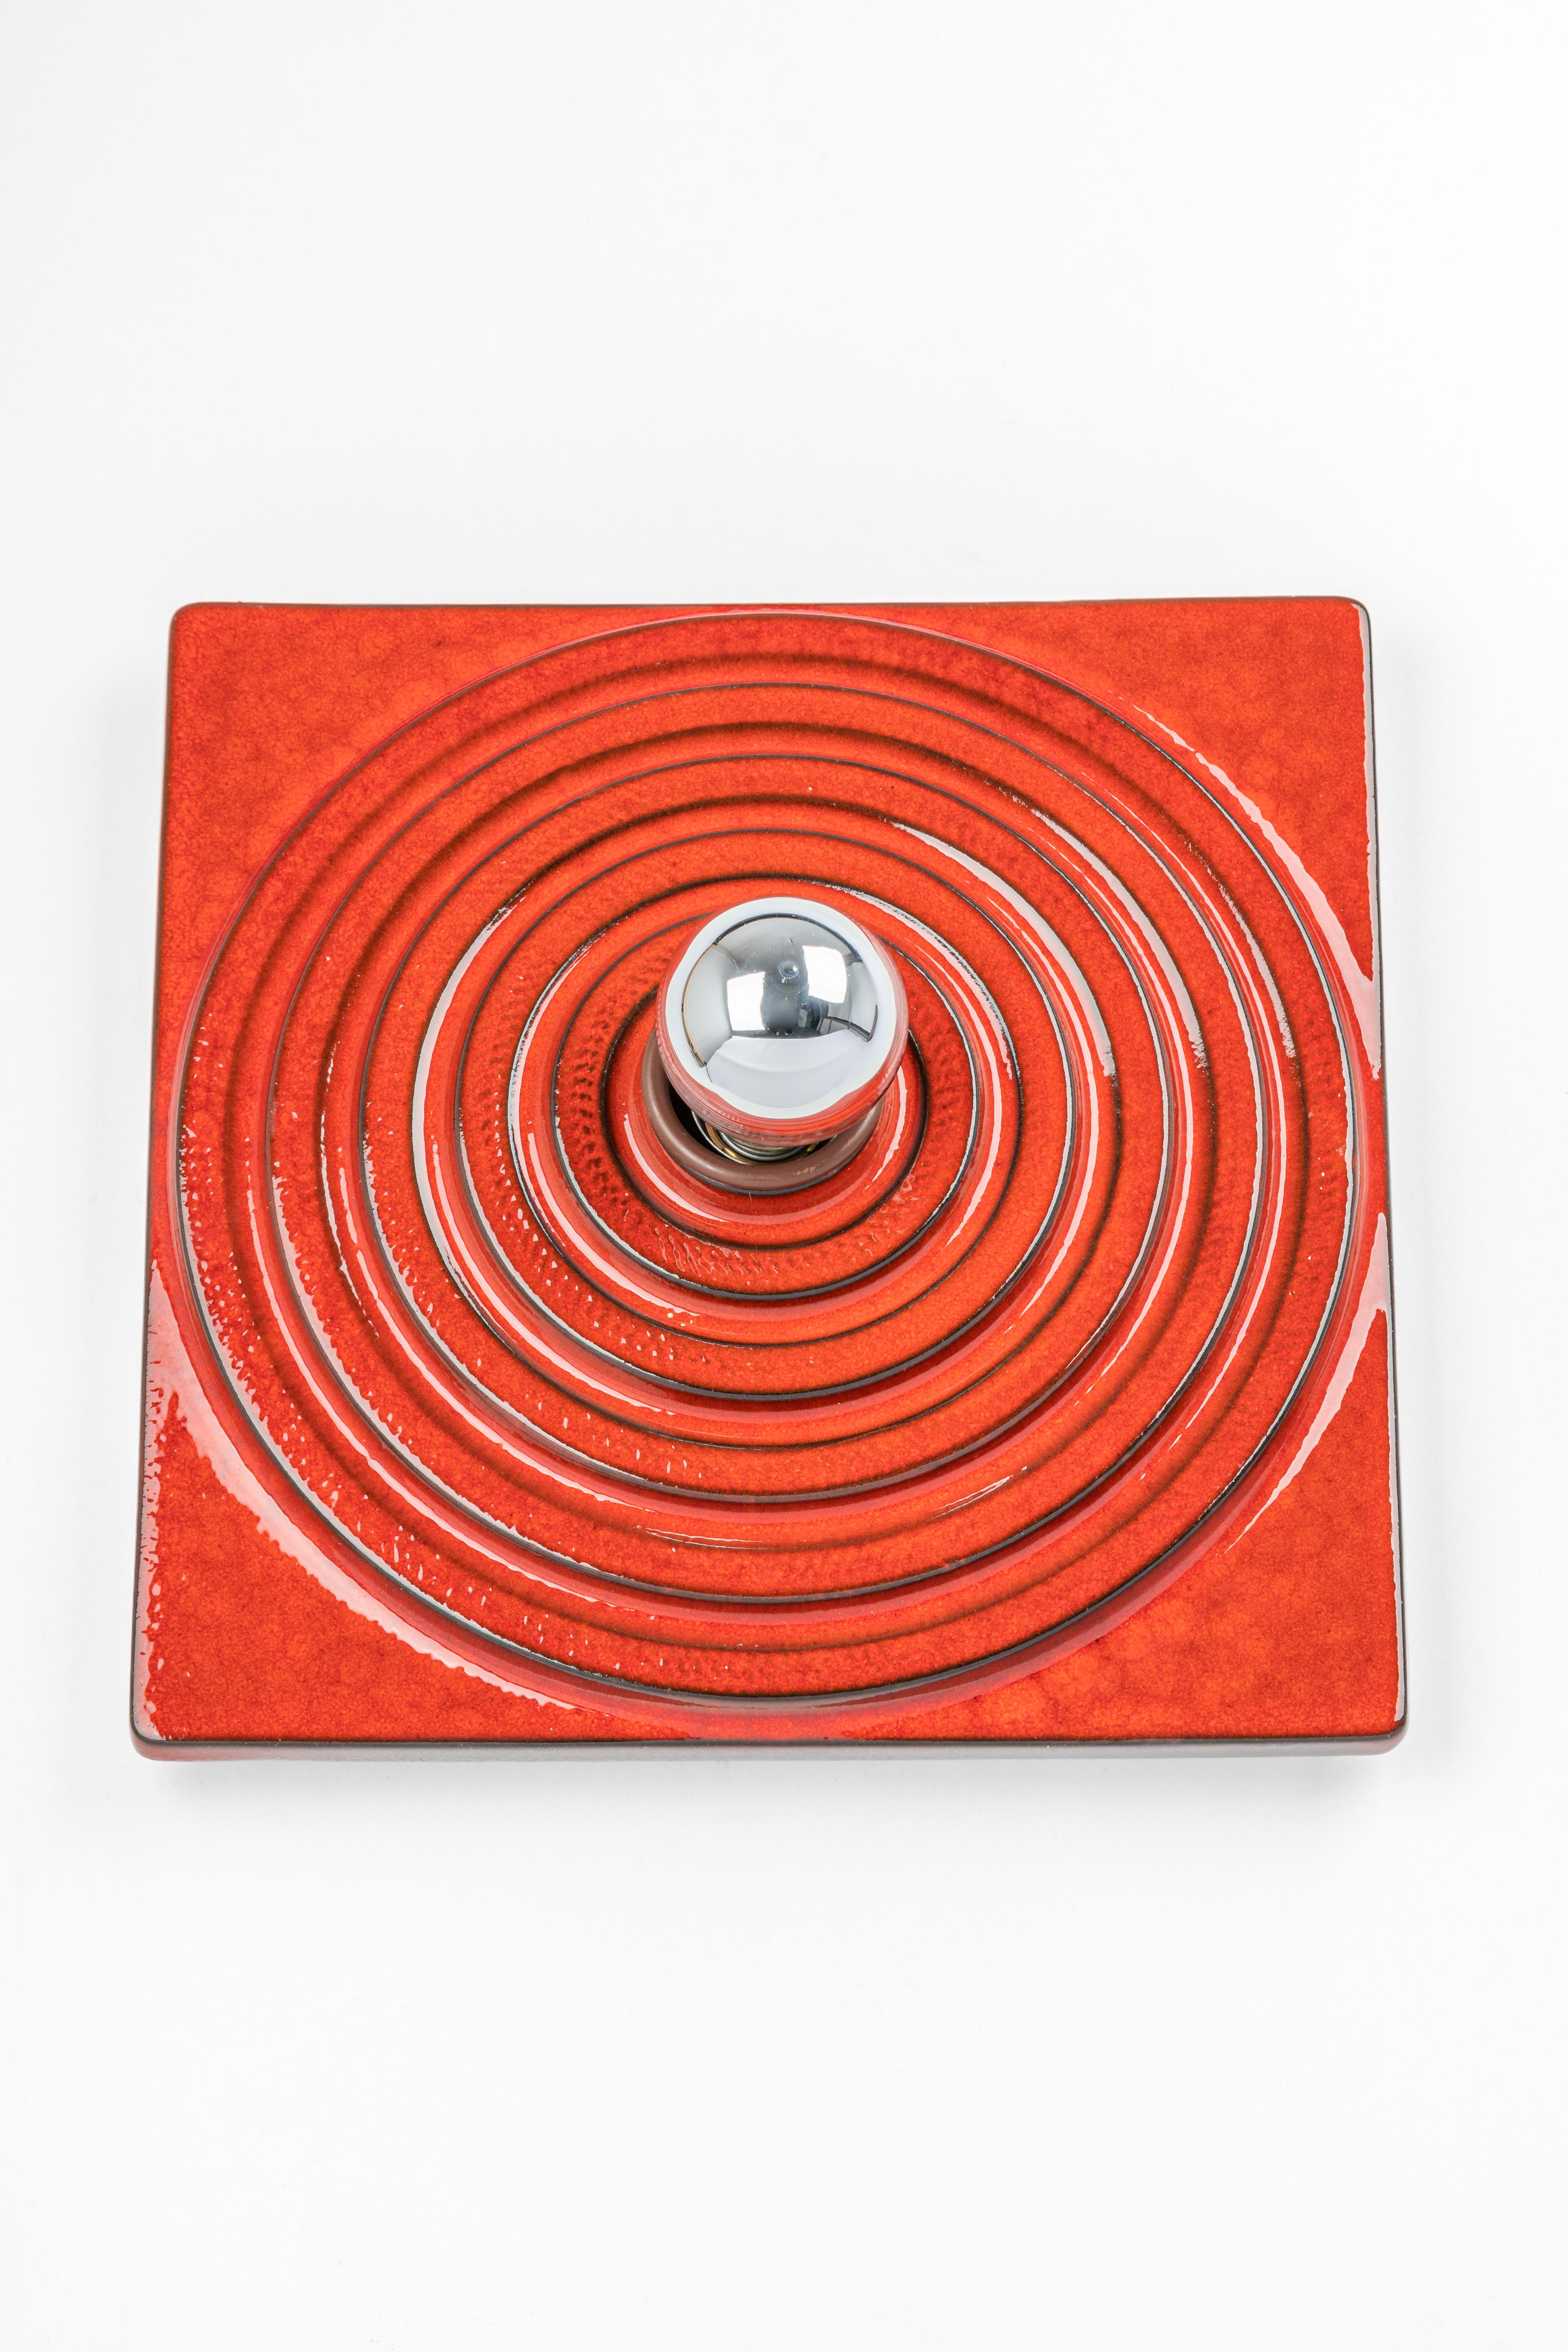 1 of 3 Ceramic Red Wall Lights, Germany, 1970s For Sale 5